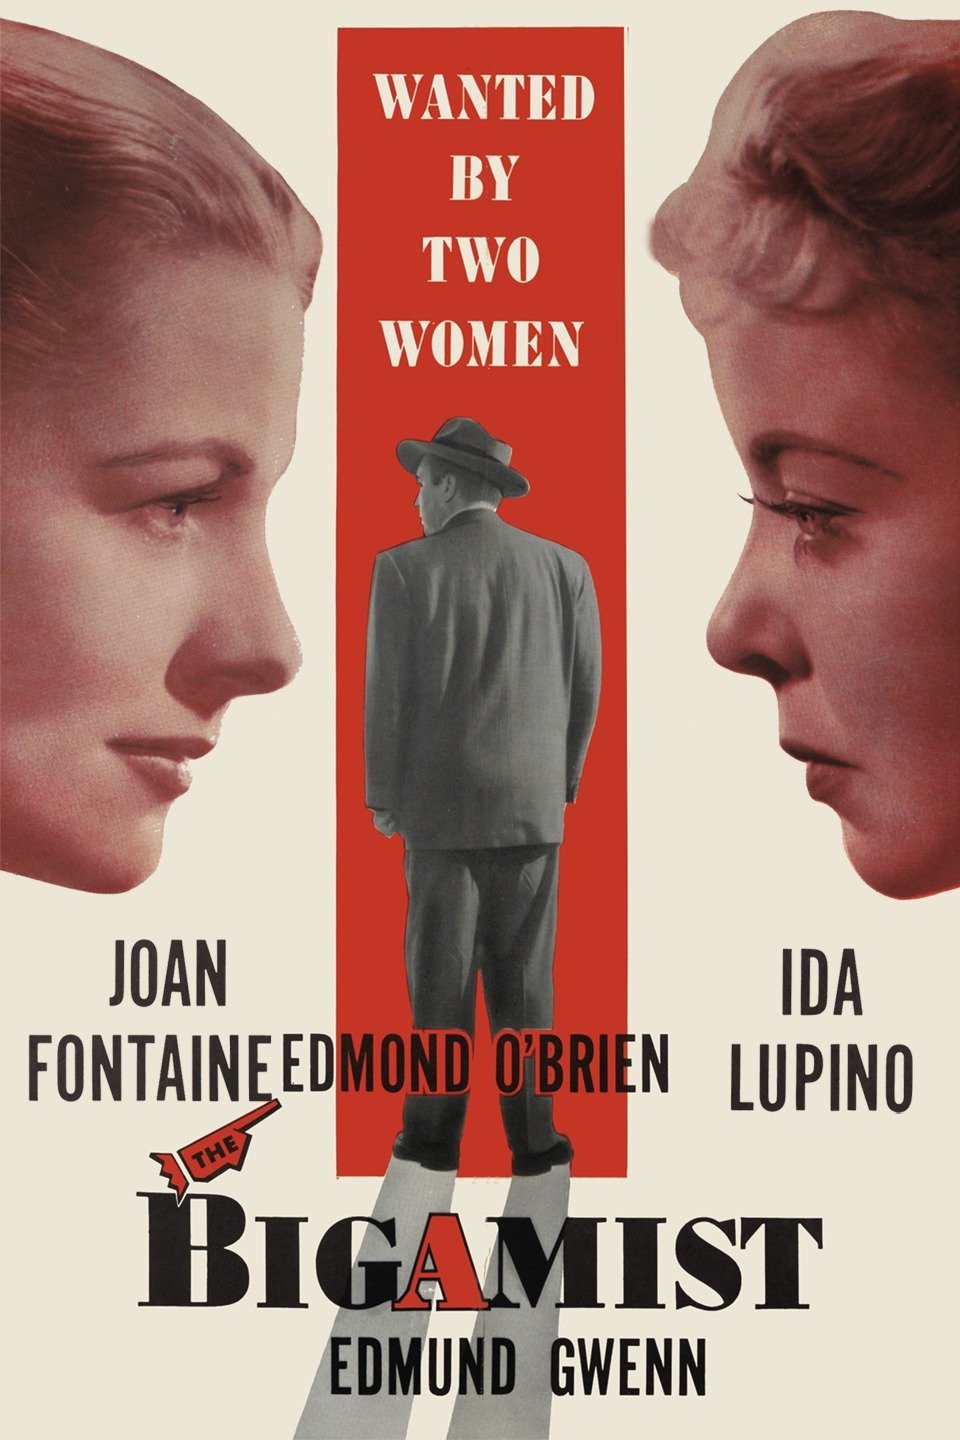 Two faces set against a white background both looking at man on a red background. Words showing the title of the movie and name of the actors. 